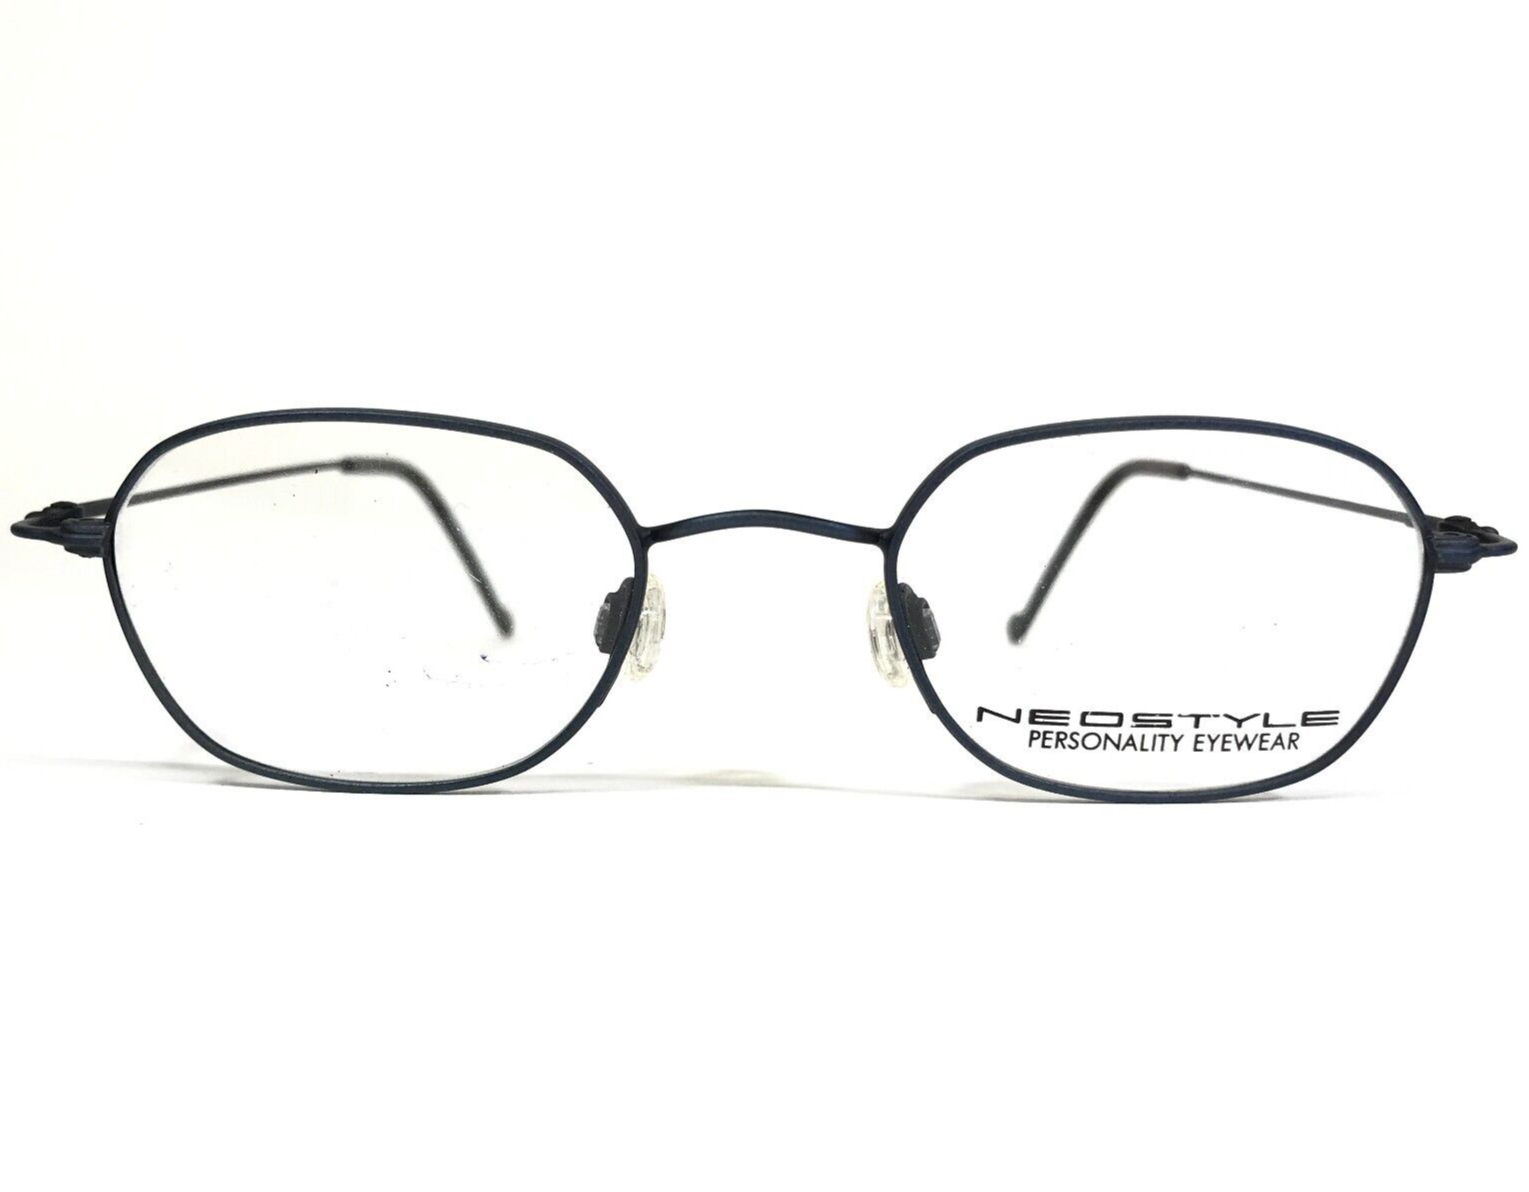 Primary image for Neostyle Petite Eyeglasses Frames COLLEGE 202 295 Matte Blue Wire Rim 44-20-145